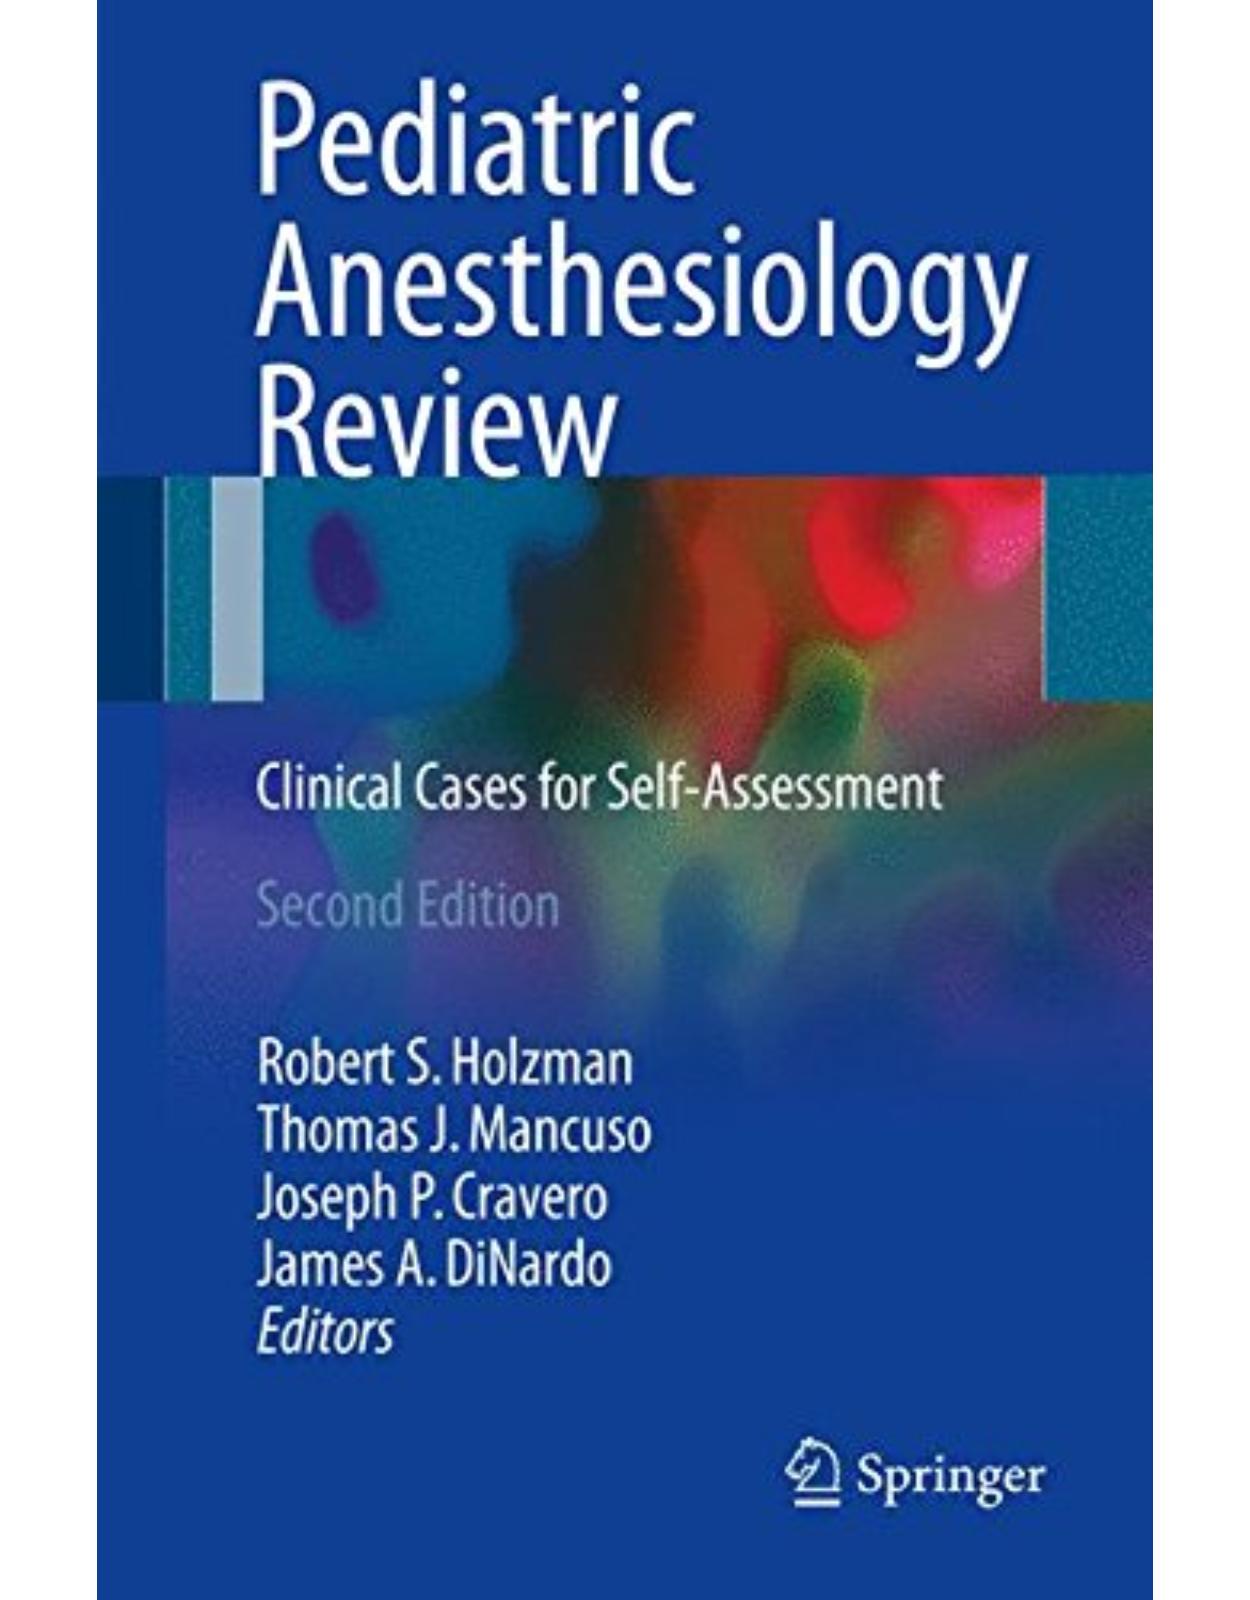 Pediatric Anesthesiology Review: Clinical Cases for Self-Assessment 